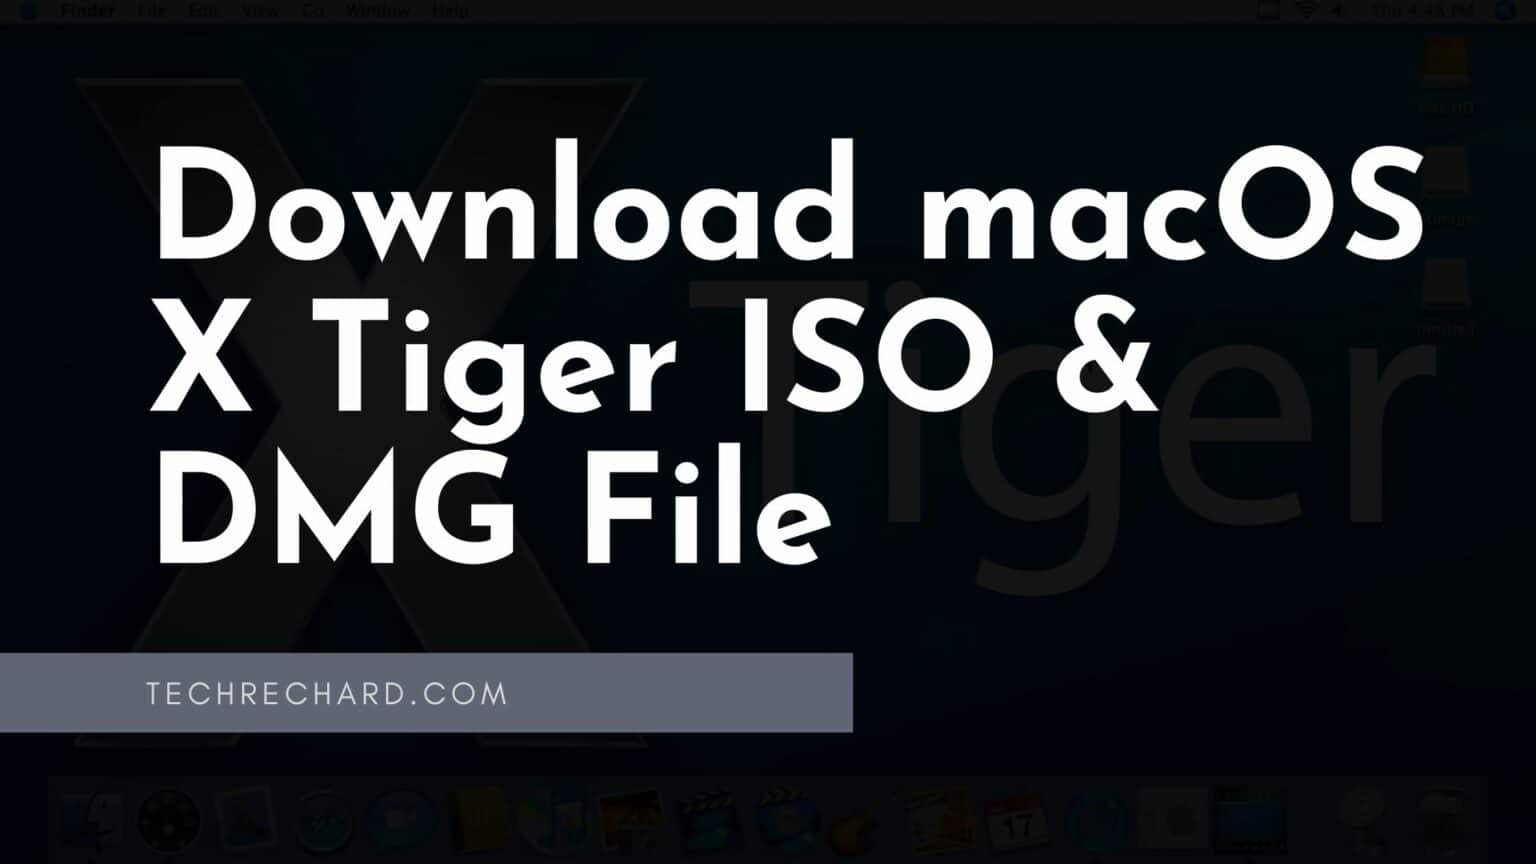 os x 10.4 iso download